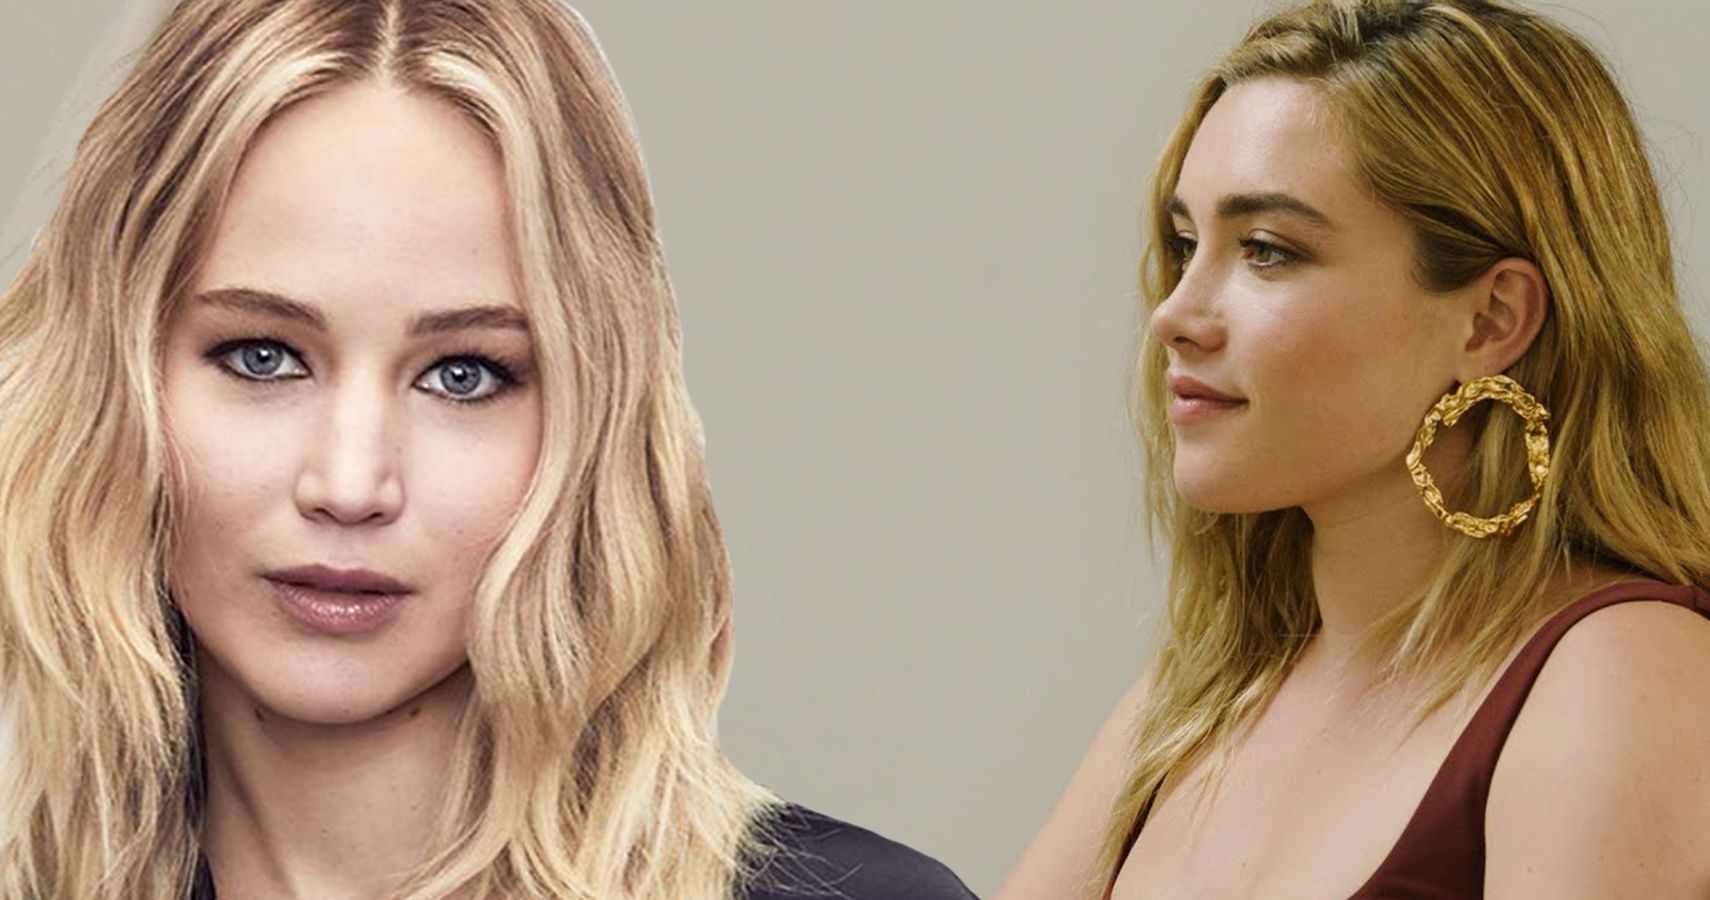 5 Ways Jennifer Lawrence And Florence Pugh Are Similar (& 5 Ways They’re Different)